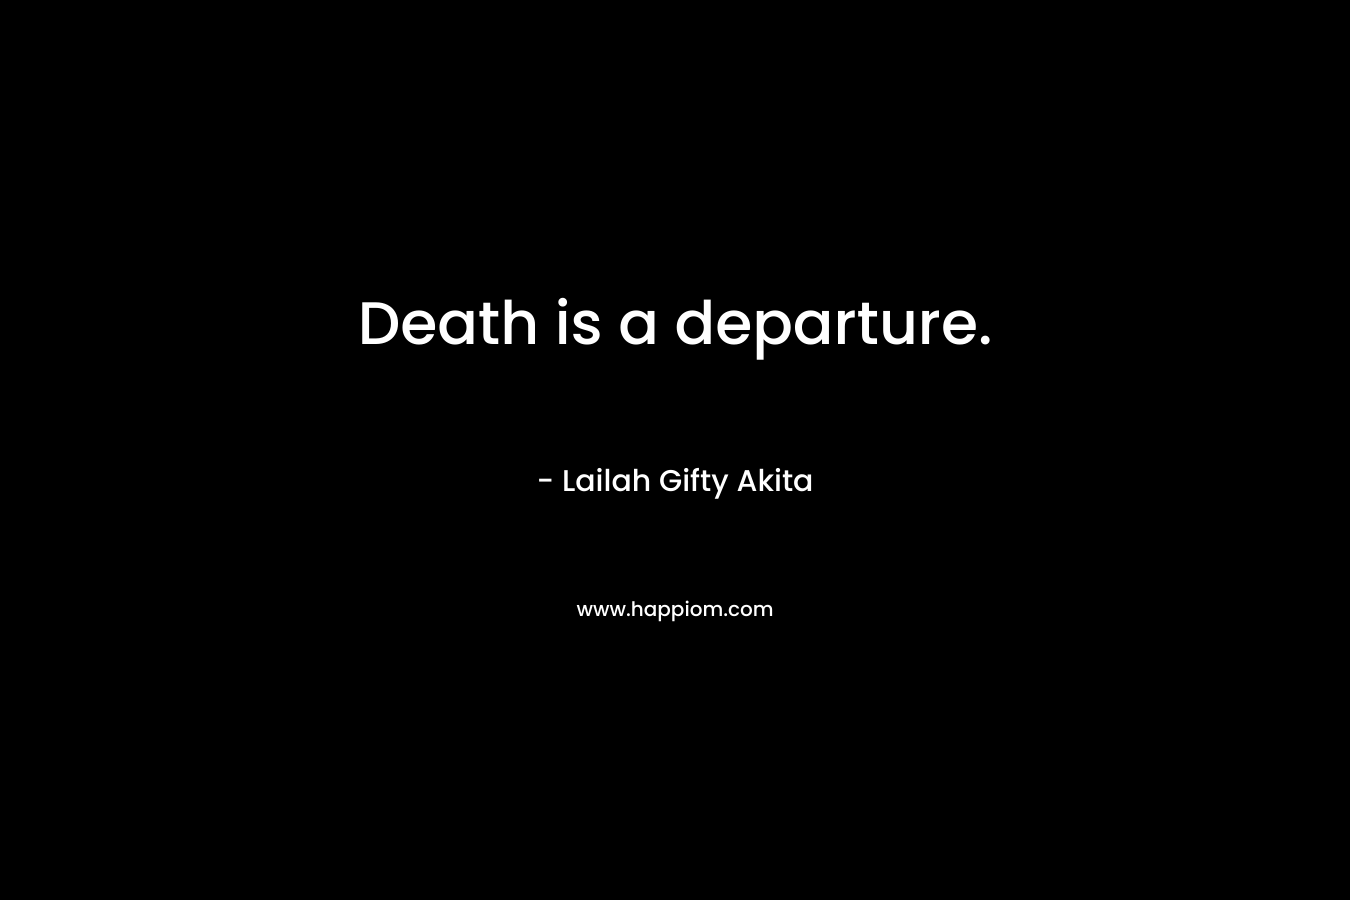 Death is a departure. – Lailah Gifty Akita